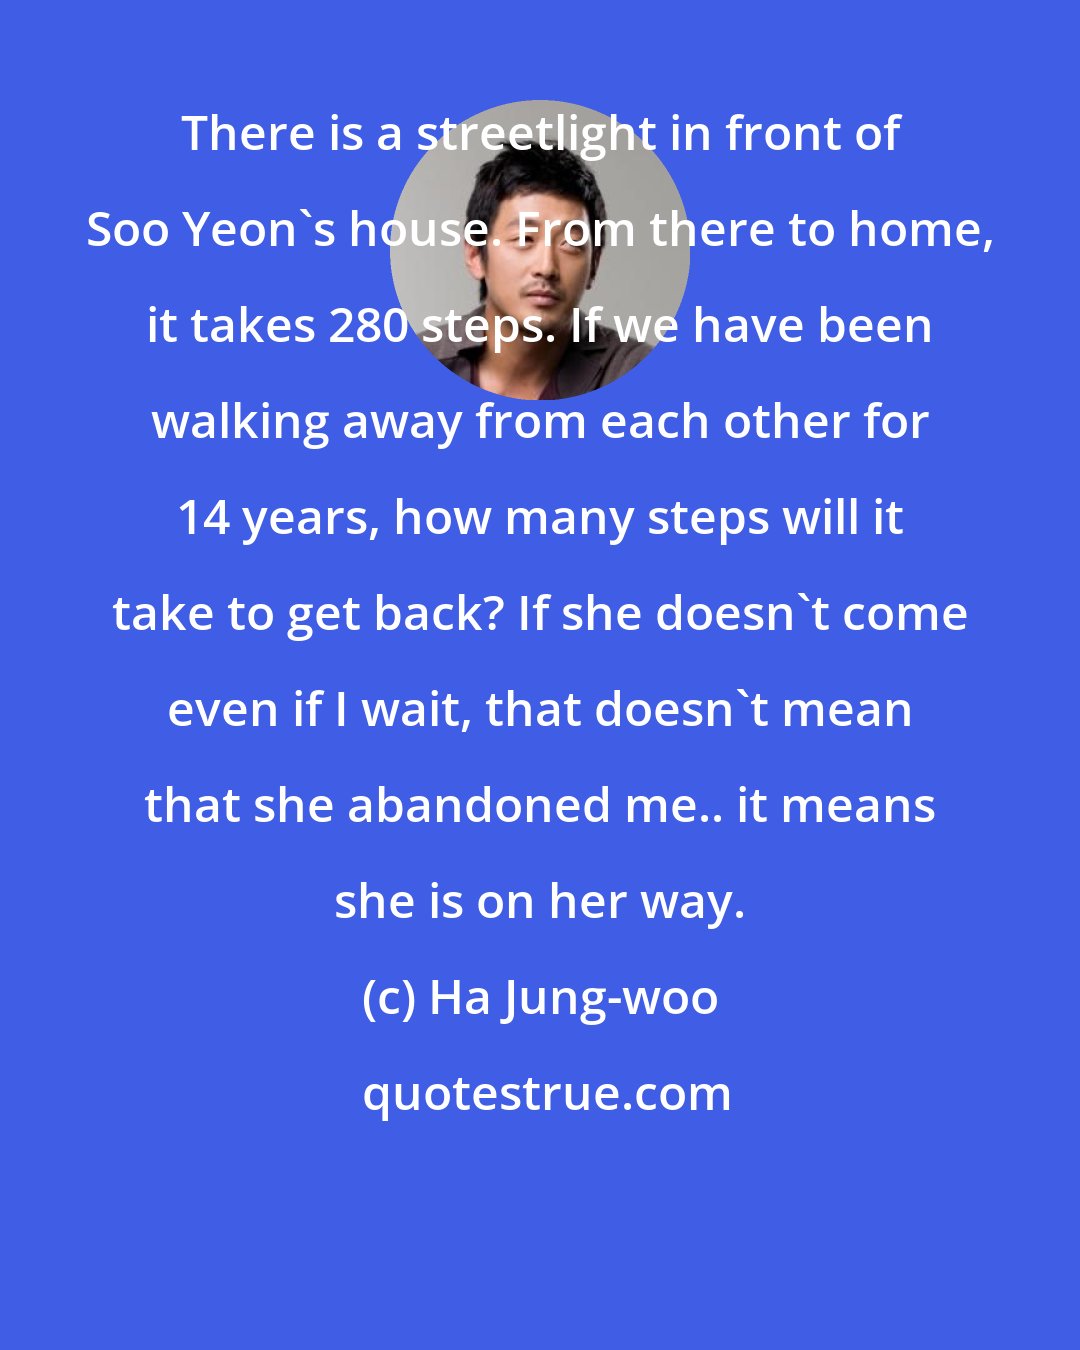 Ha Jung-woo: There is a streetlight in front of Soo Yeon's house. From there to home, it takes 280 steps. If we have been walking away from each other for 14 years, how many steps will it take to get back? If she doesn't come even if I wait, that doesn't mean that she abandoned me.. it means she is on her way.